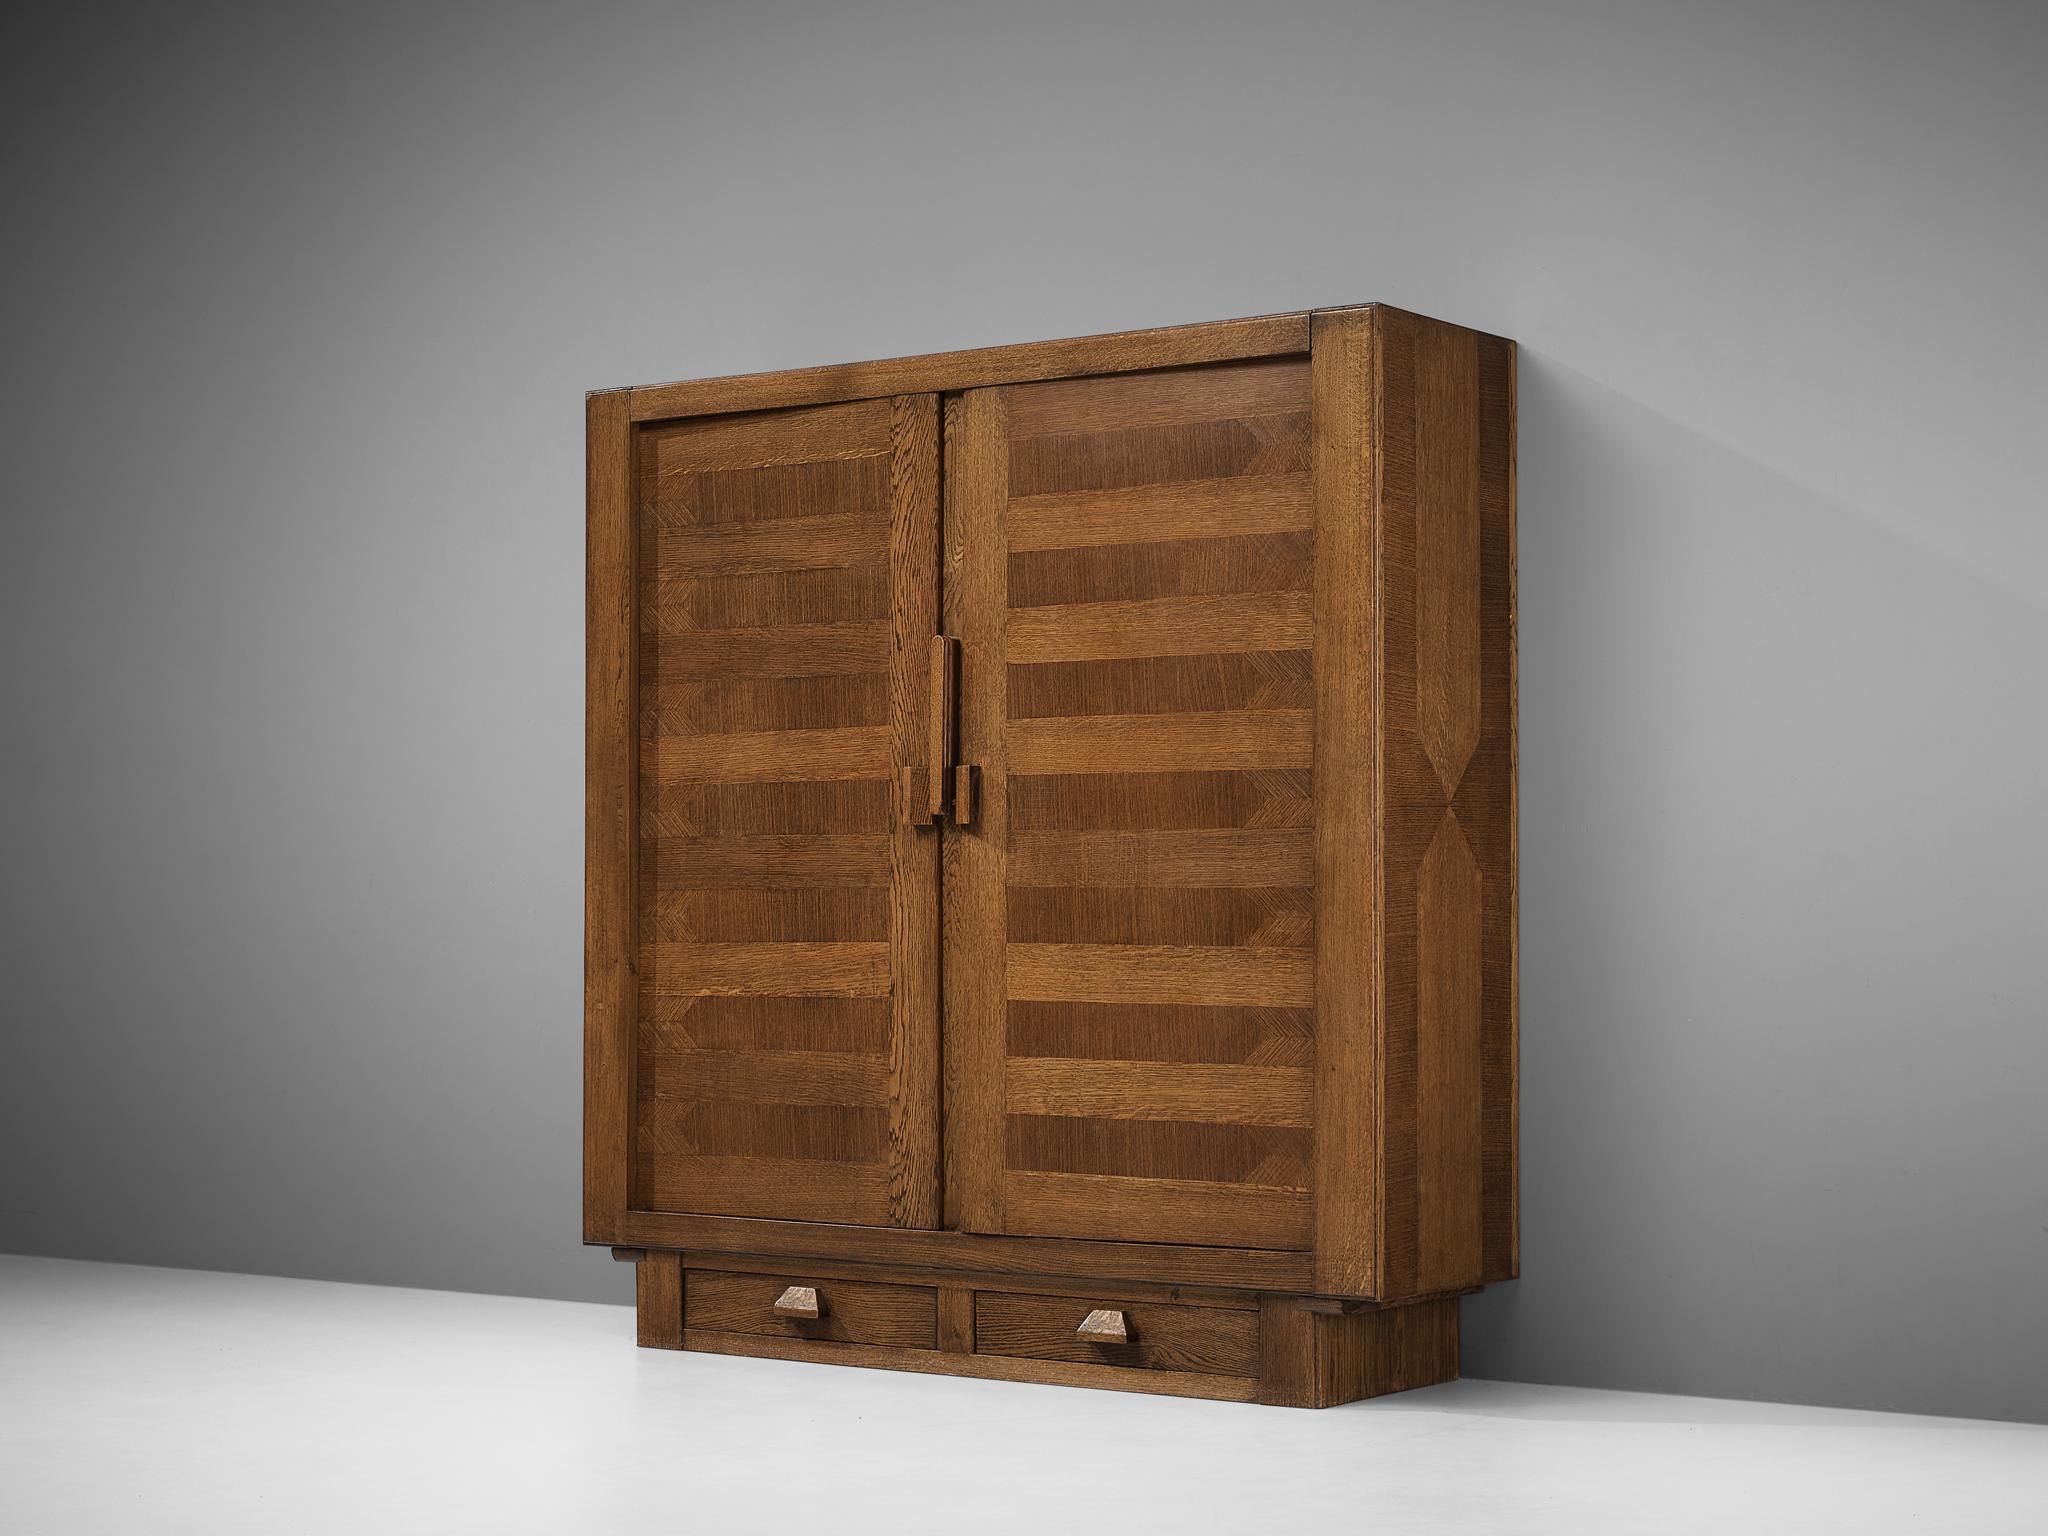 Guillerme et Chambron, amoire, stained oak, France, 1960s

French designer duo Guillerme et Chambron once again proof their great craftsmanship. This cubic wardrobe with two doors and two drawers at the bottom shows geometric inlays that structure